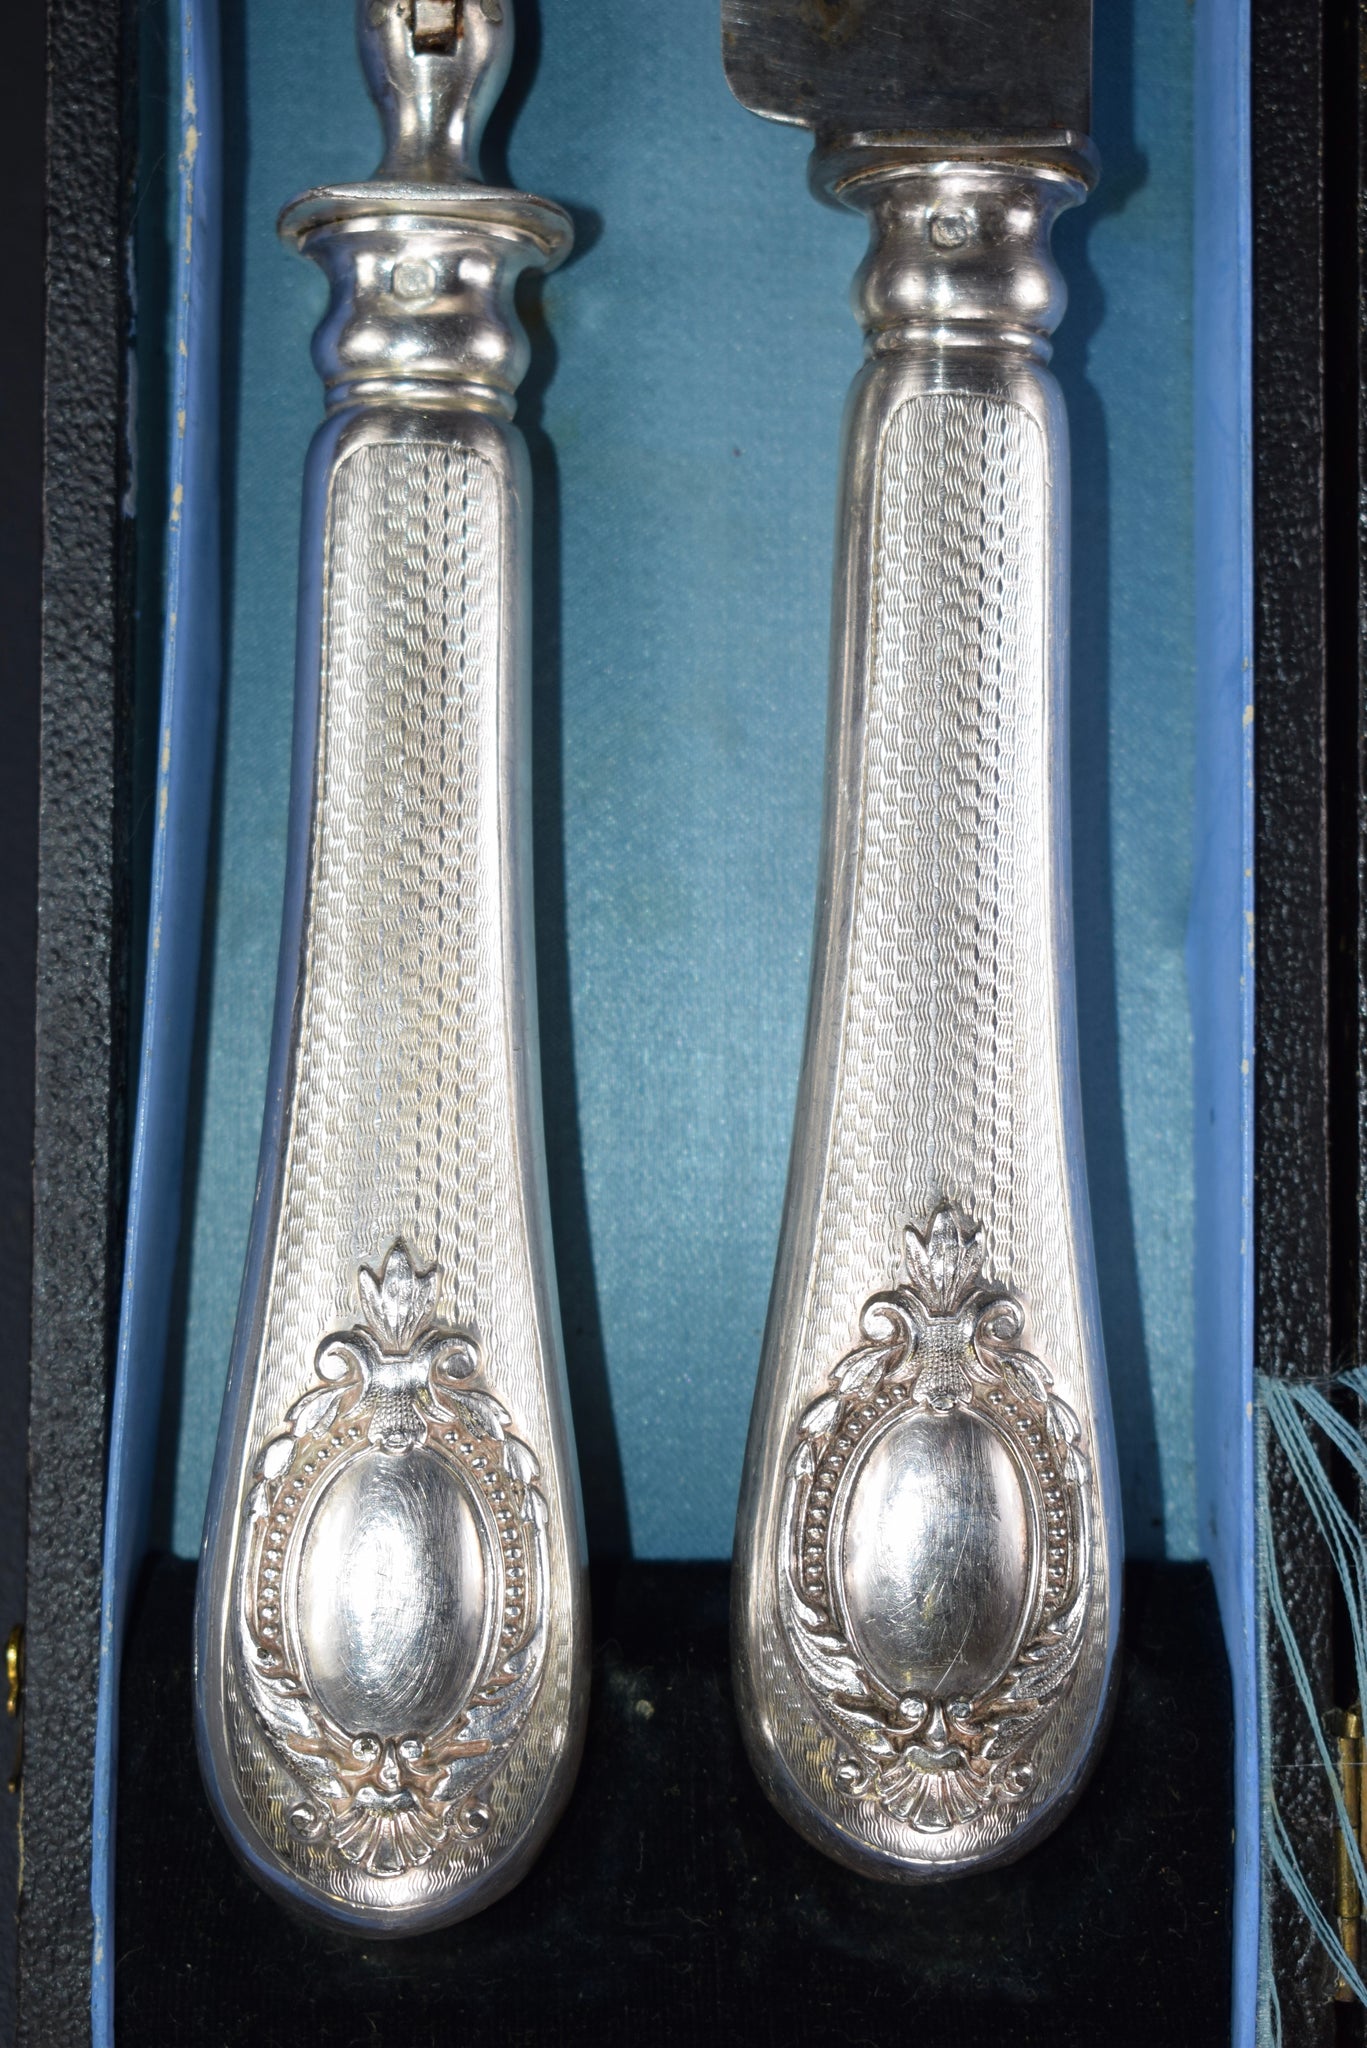 2pc Silver Carving Set Knife Vintage French Guilloche Silver